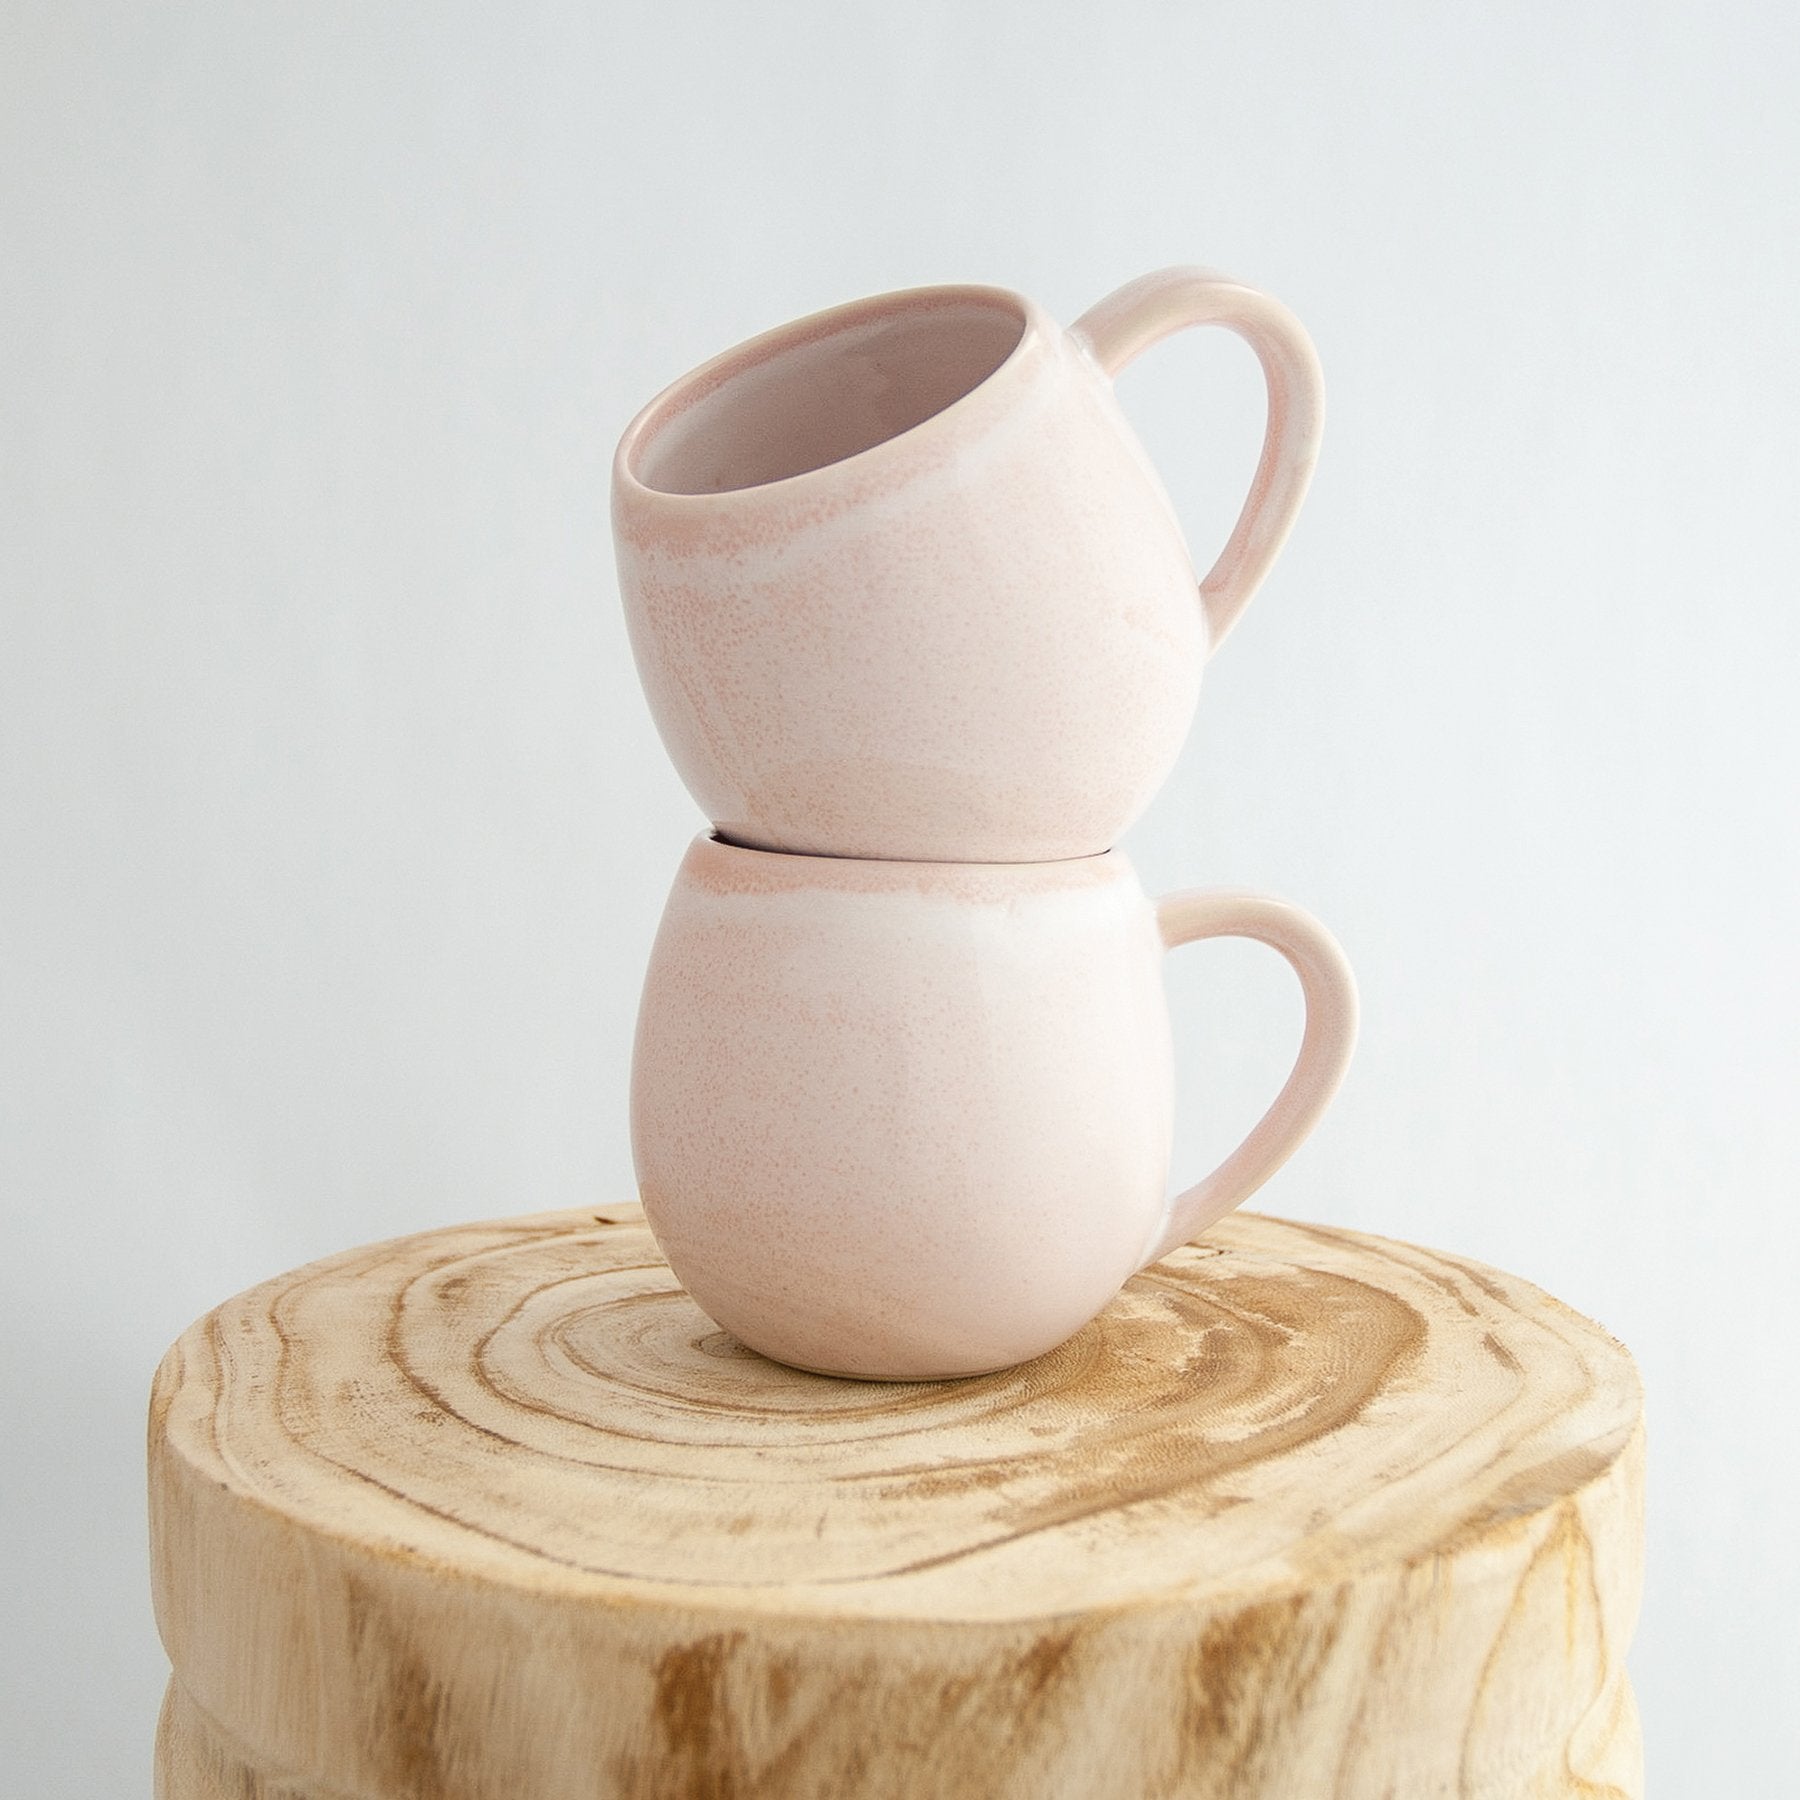 Two Robert Gordon rose quartz pink canvas mugs stacked on a natural wooden round side table